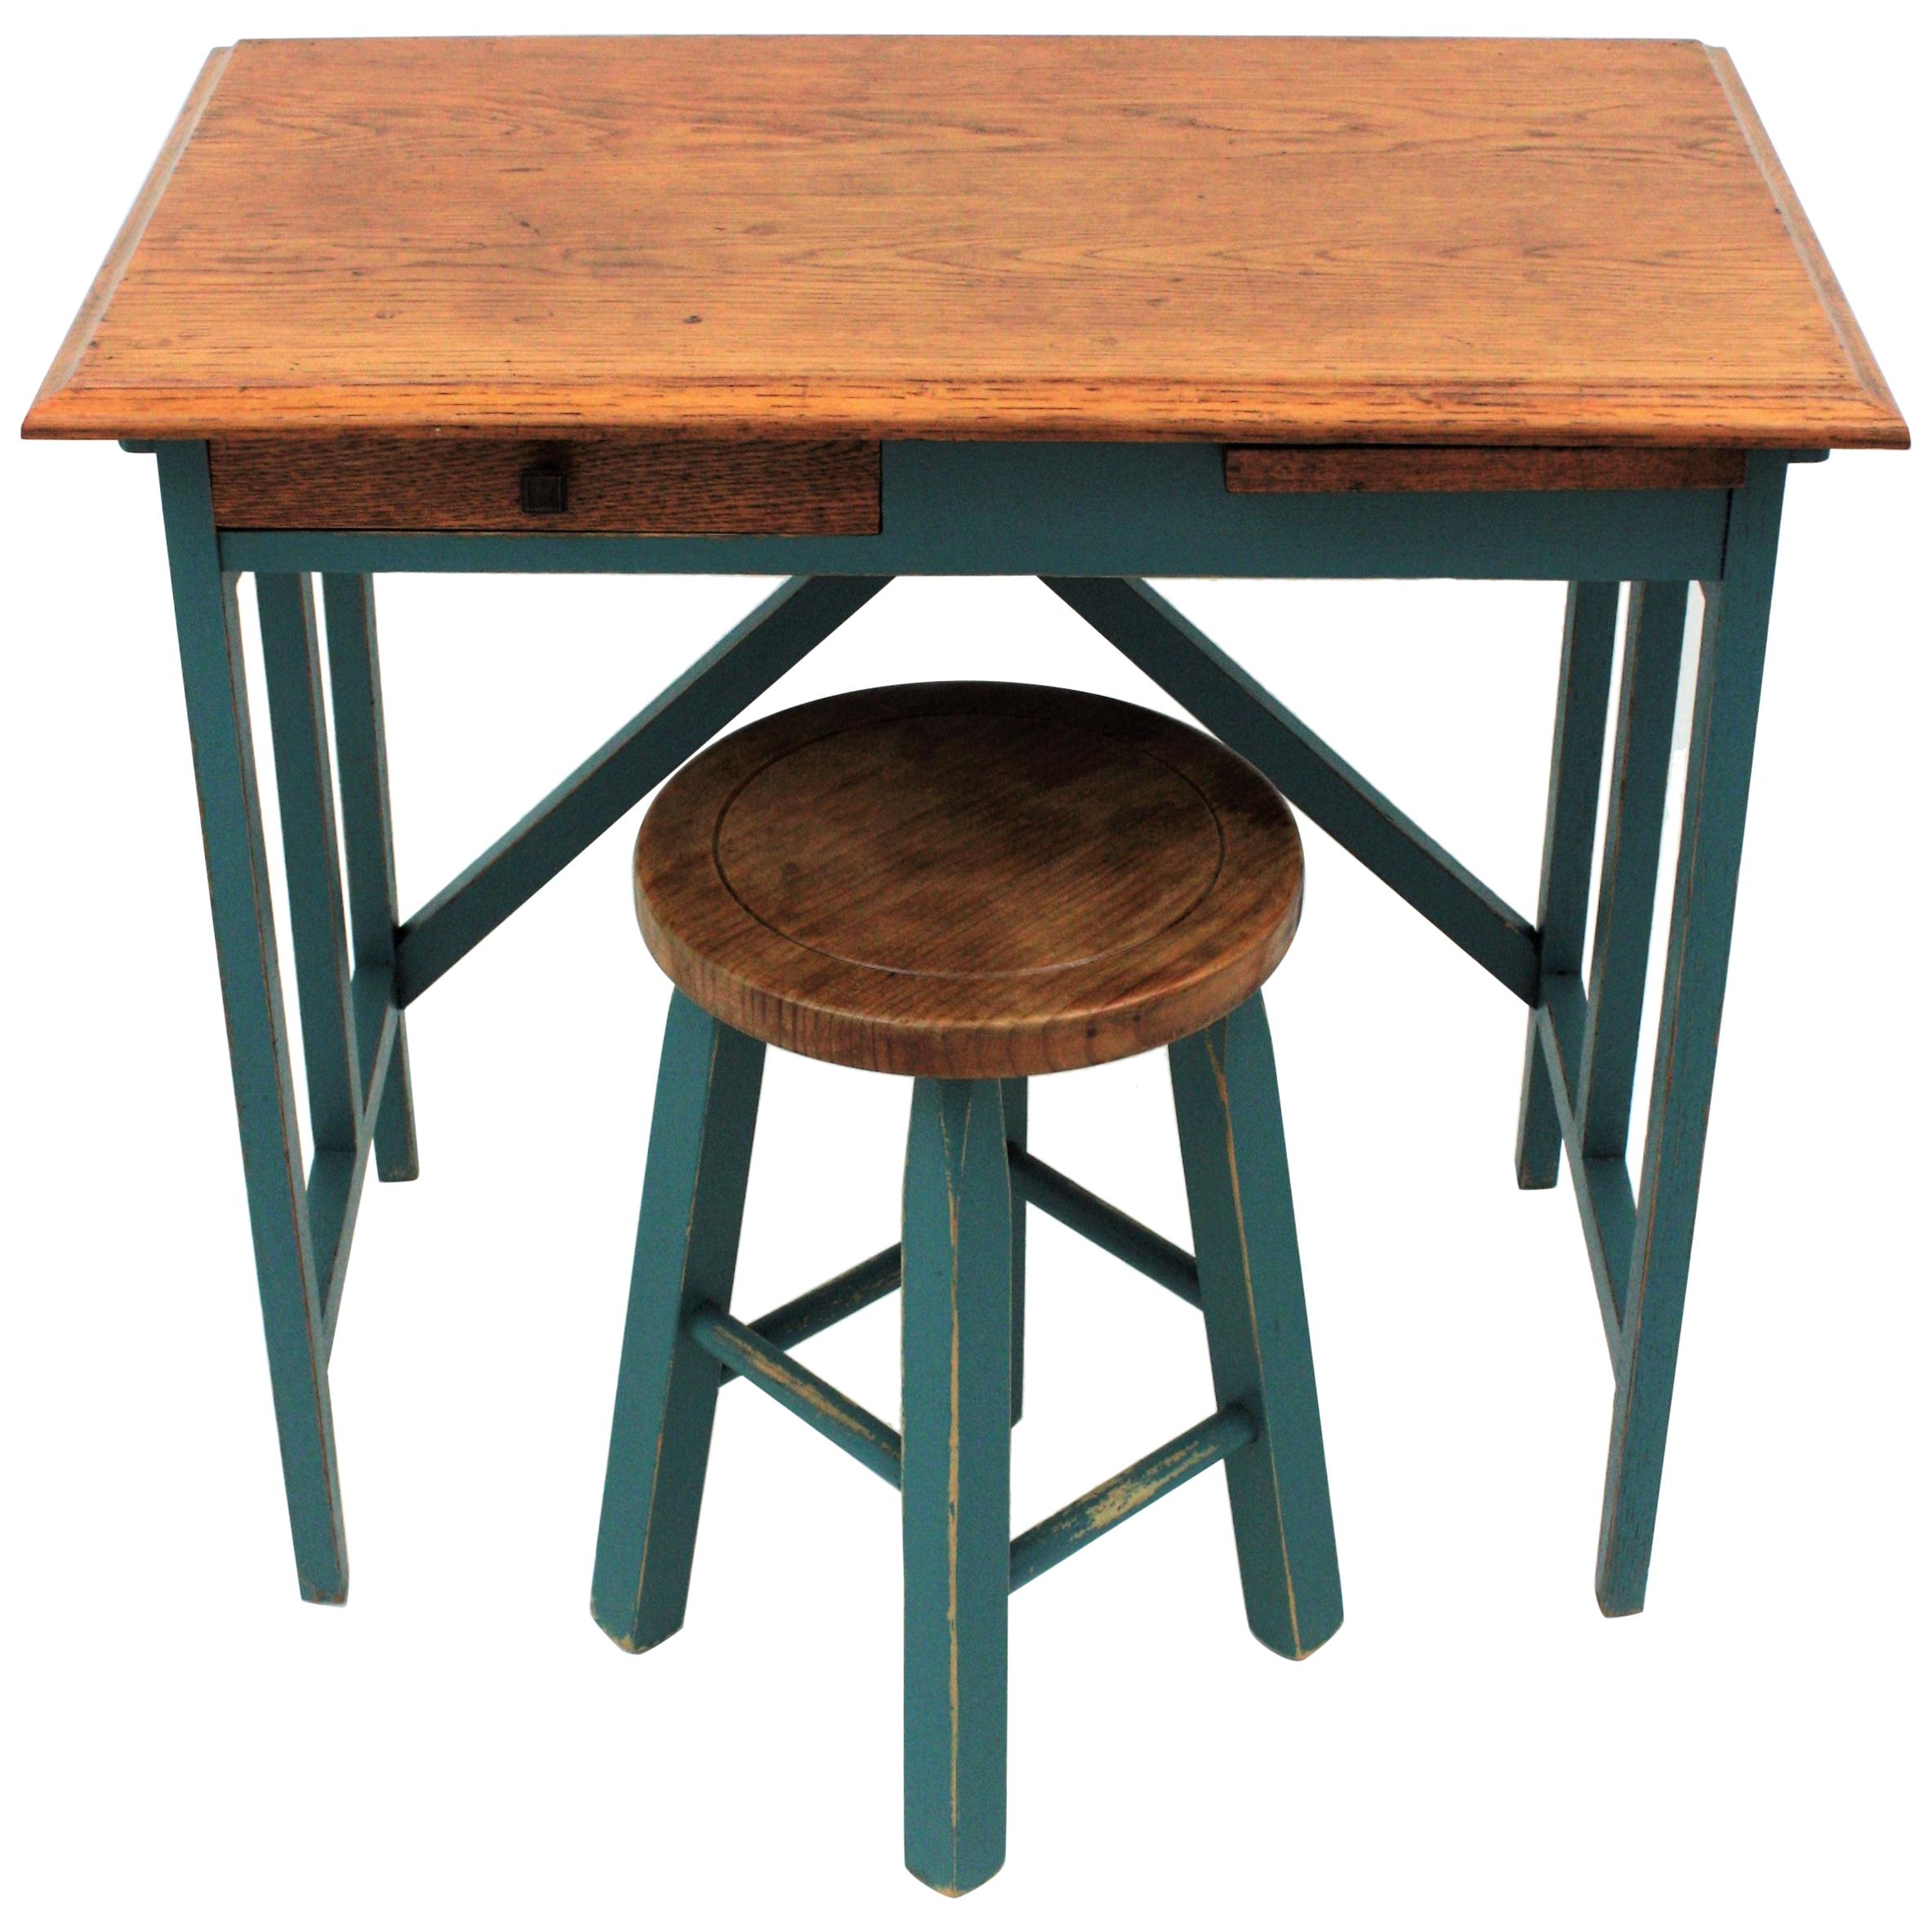 Industrial Desk and Stool, Oak, Spain, 1930s
A lovely set composed by an industrial desk with Art Deco accents patinated in Jade green-blue color with the top in oakwood.
The small stool is made of pine wood combining the same color.
This set will